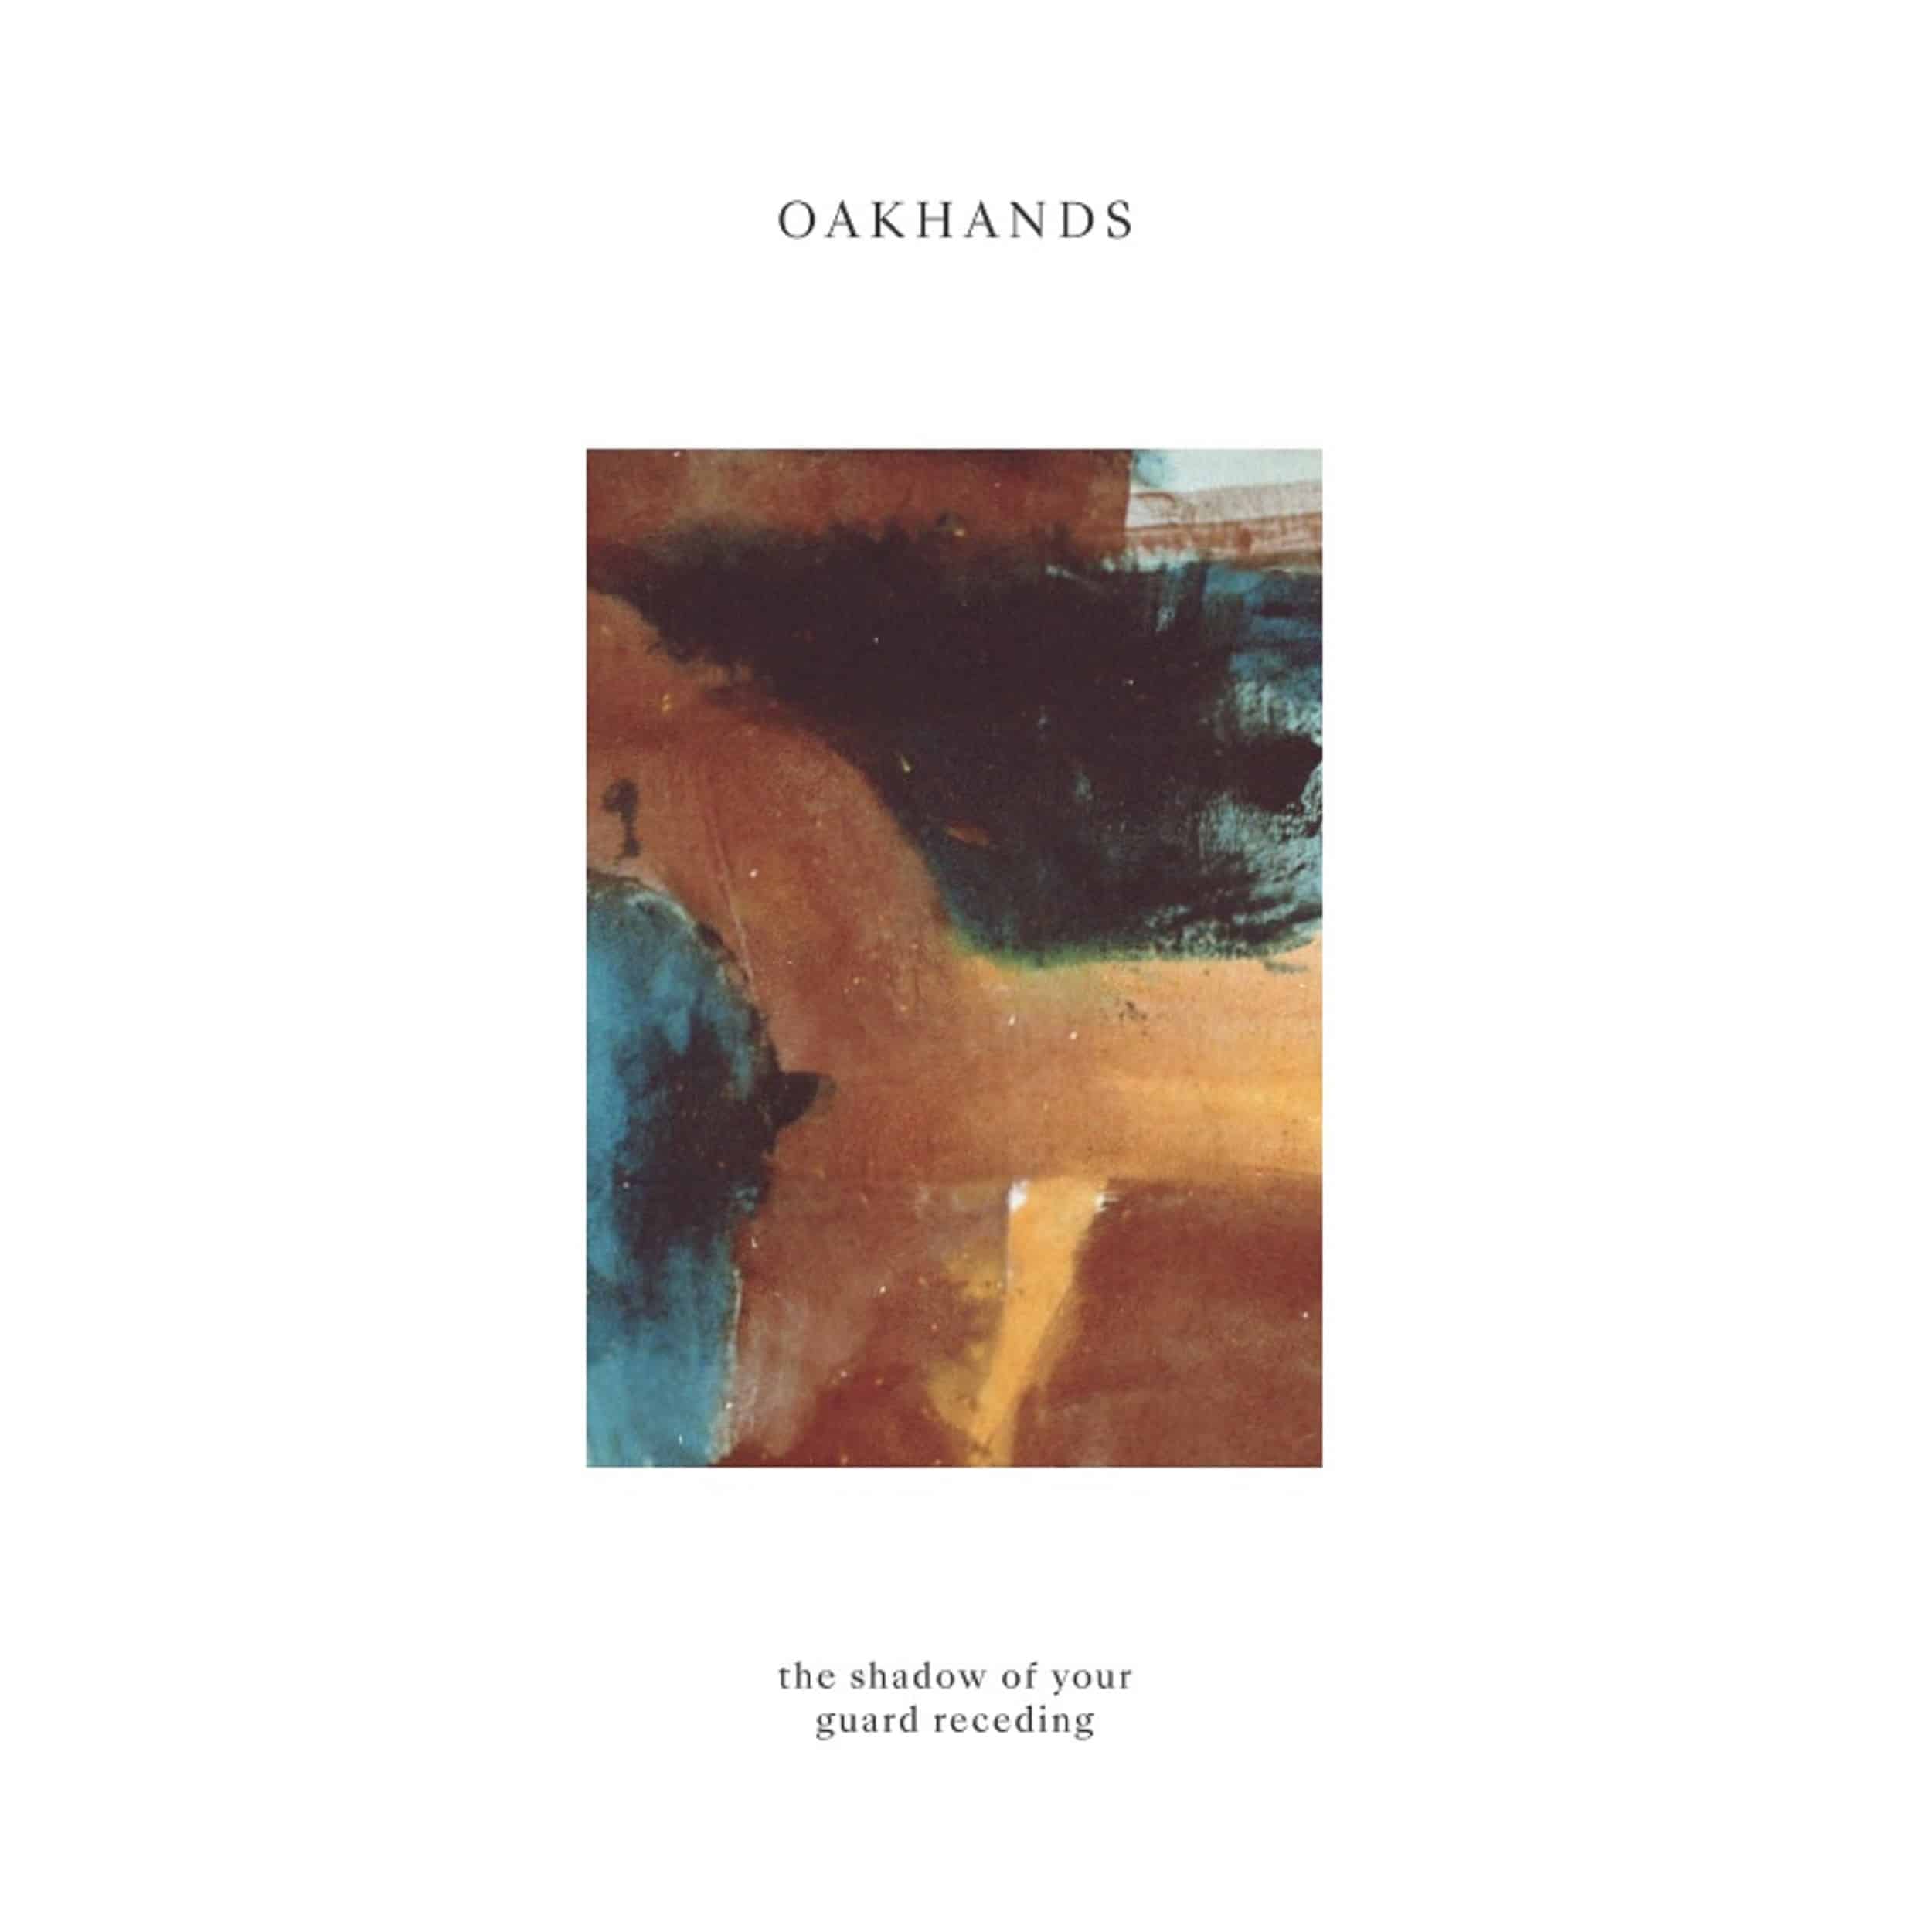 Oakhands - The Shadow of Your Guard Receeding